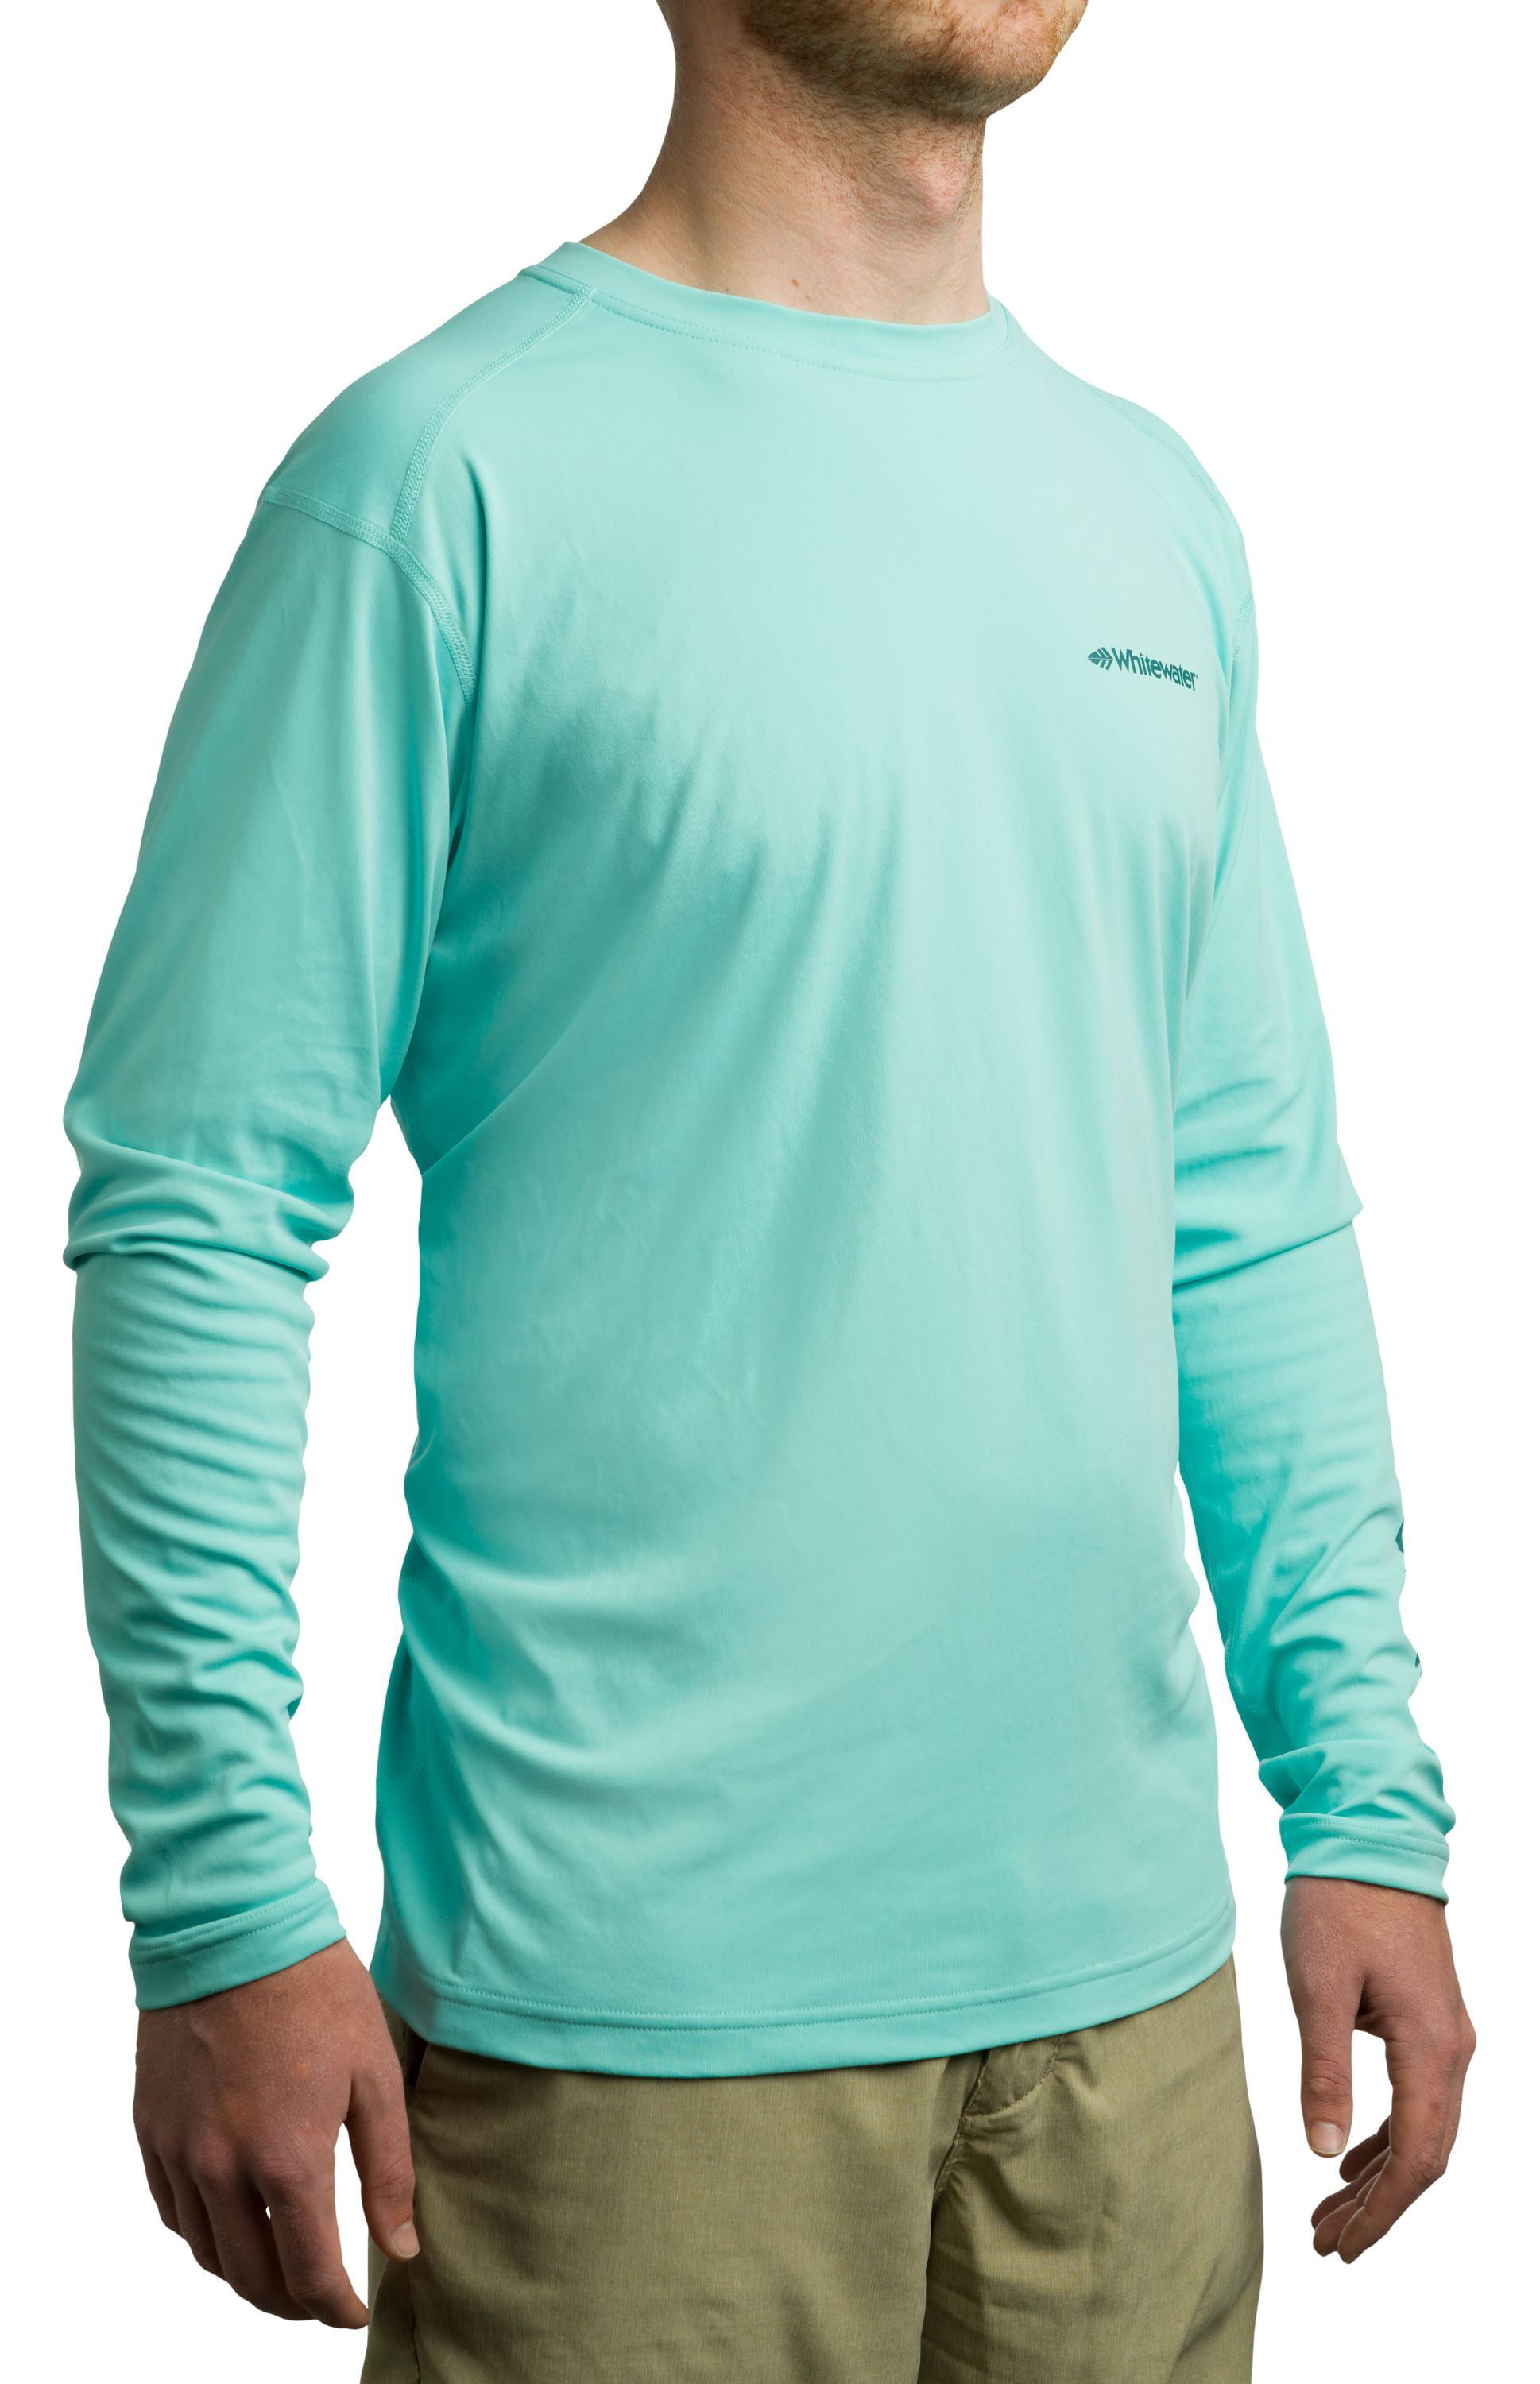 Whitewater Fishing Lightweight Long Sleeve Tech Shirt with UPF Protection  (Lagoon, 3X-Large)